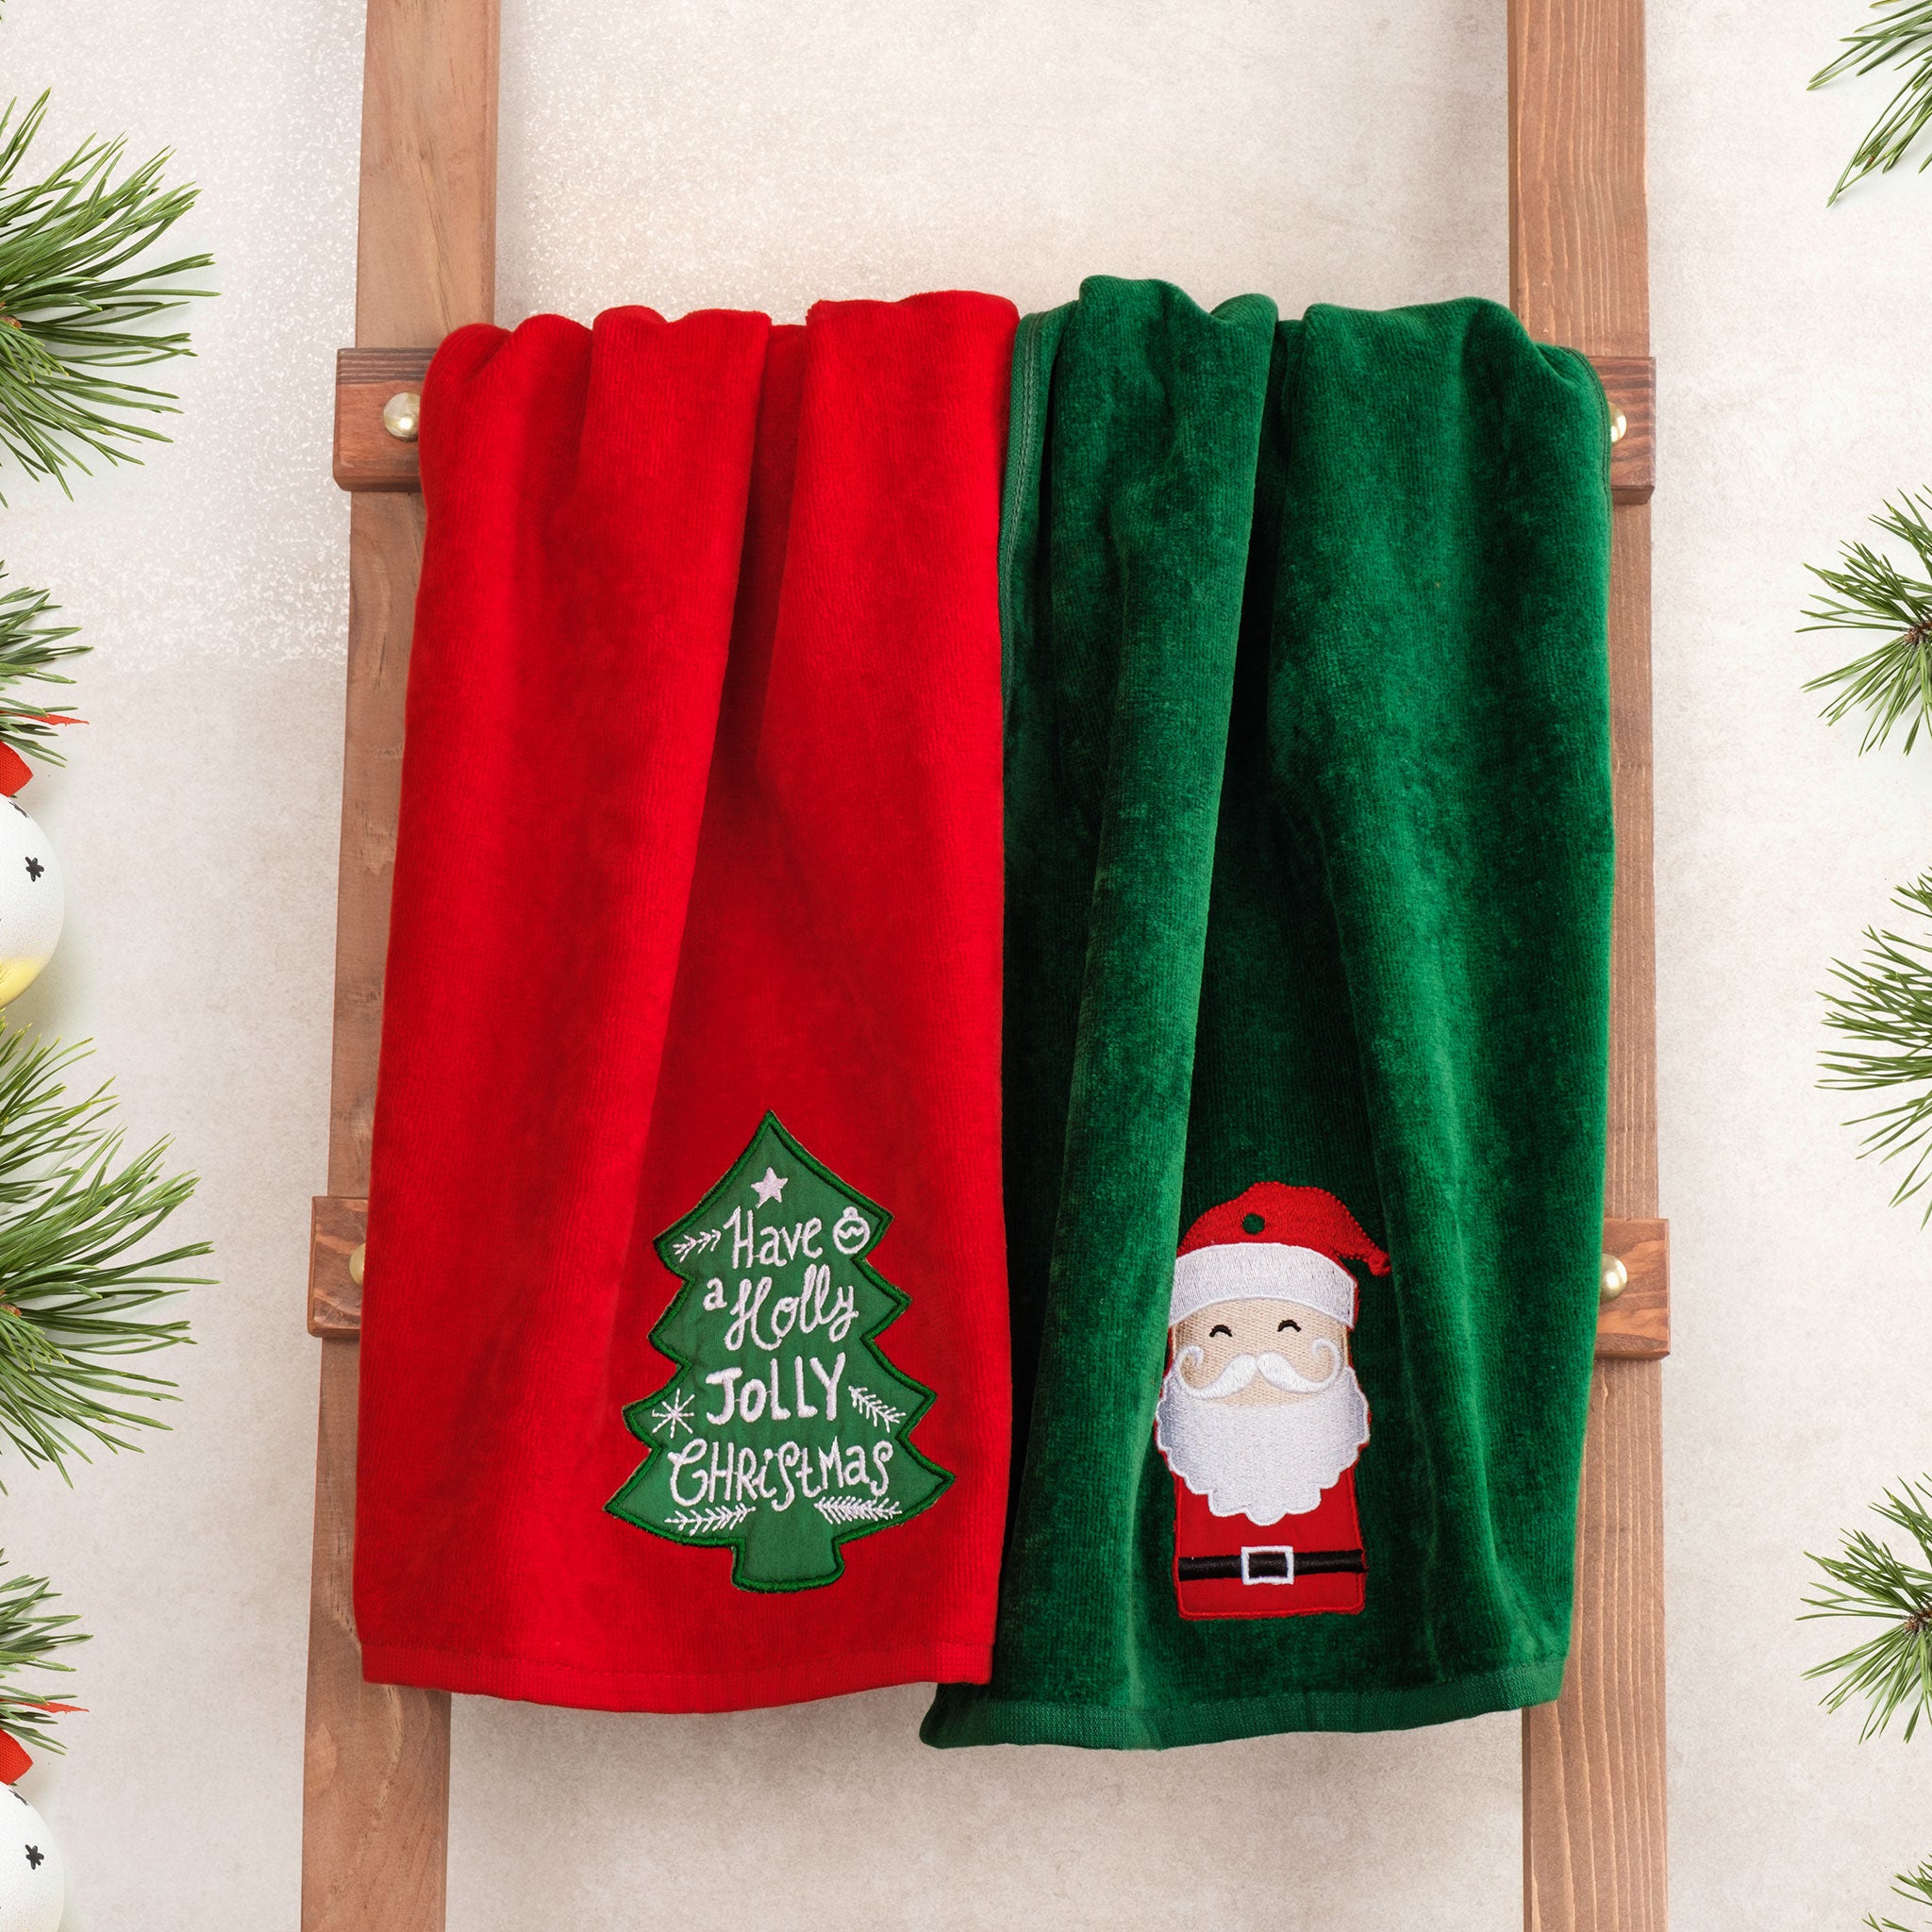 American Soft Linen - Christmas Towels 2 Packed Embroidered Towels for Decor Xmas - Santa-tree - 3